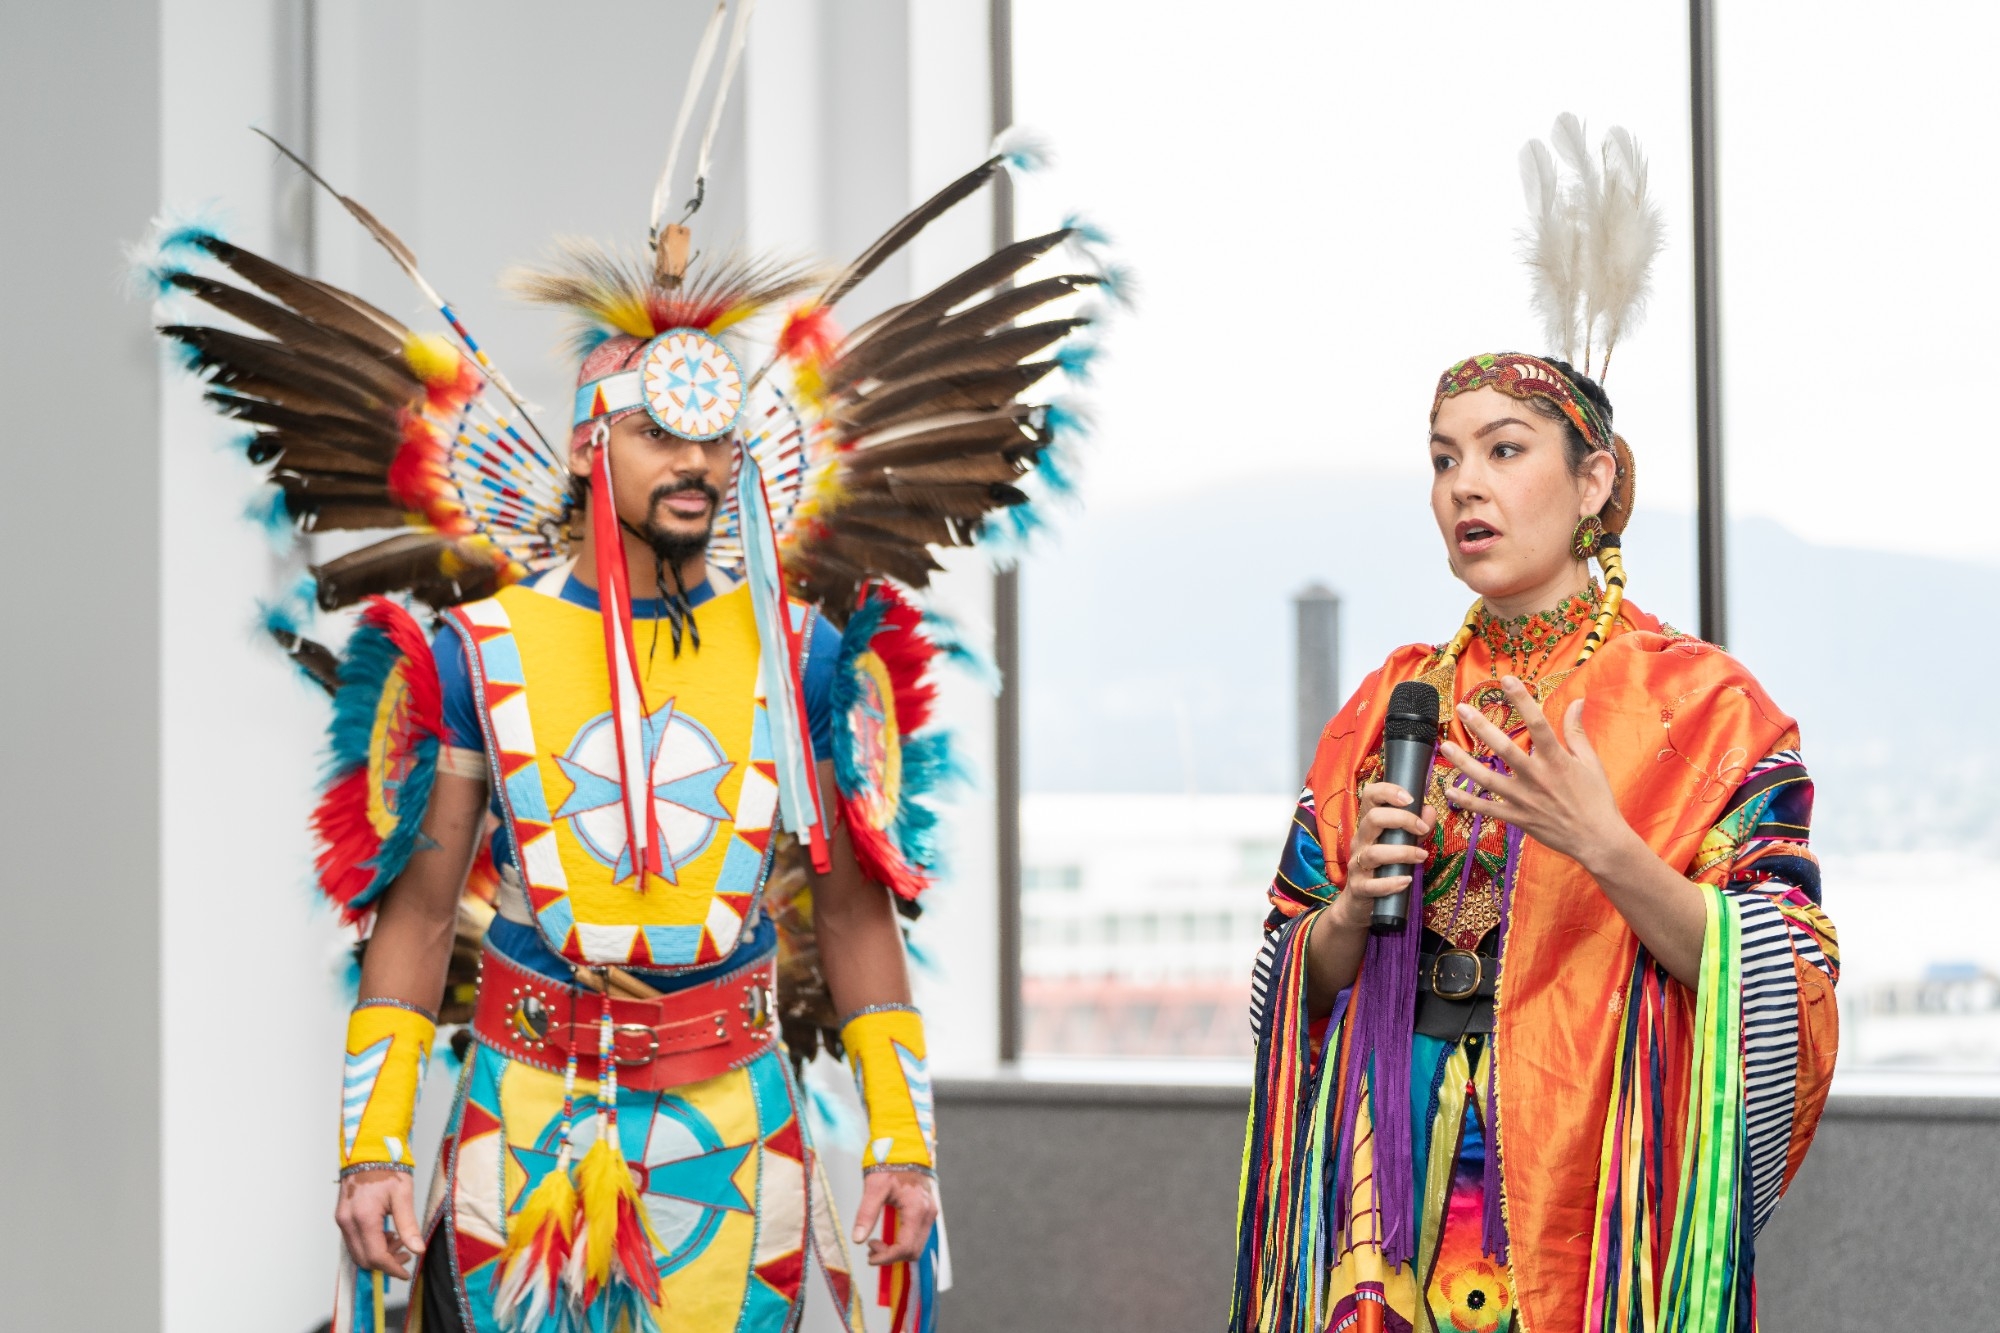 SFU showcased Indigenous artists through a special series of ArtsLive performances. Pictured here, Wild Moccasin Dancers Shyama-Priya, Cree and David Whitebean, Mohawk.